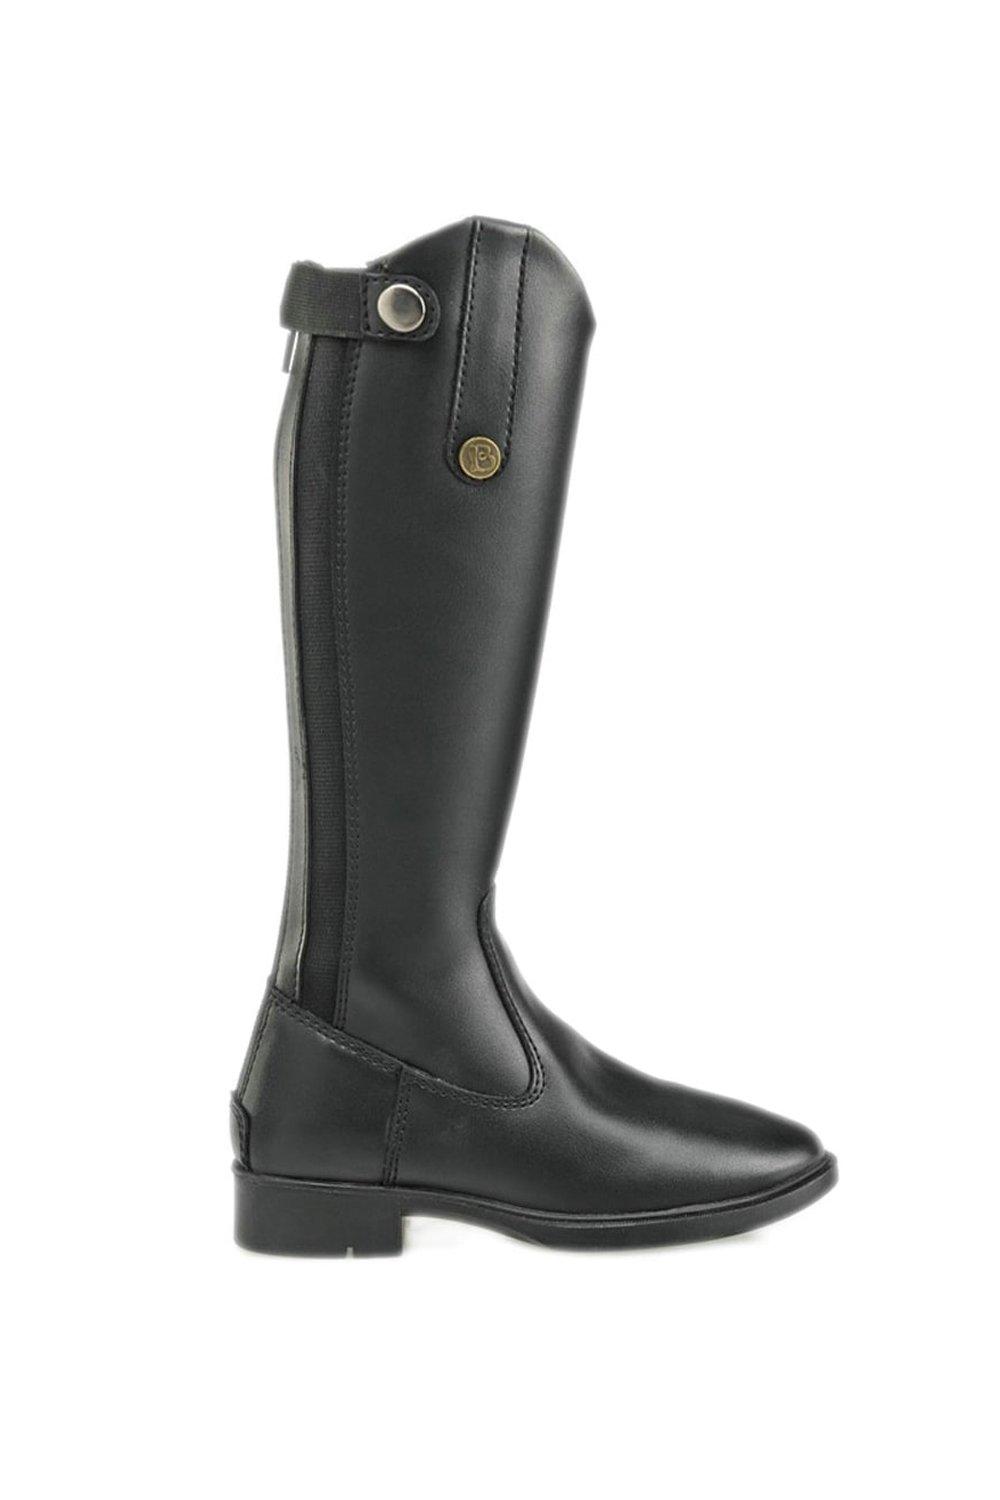 Modena Piccino Synthetic Long Boots